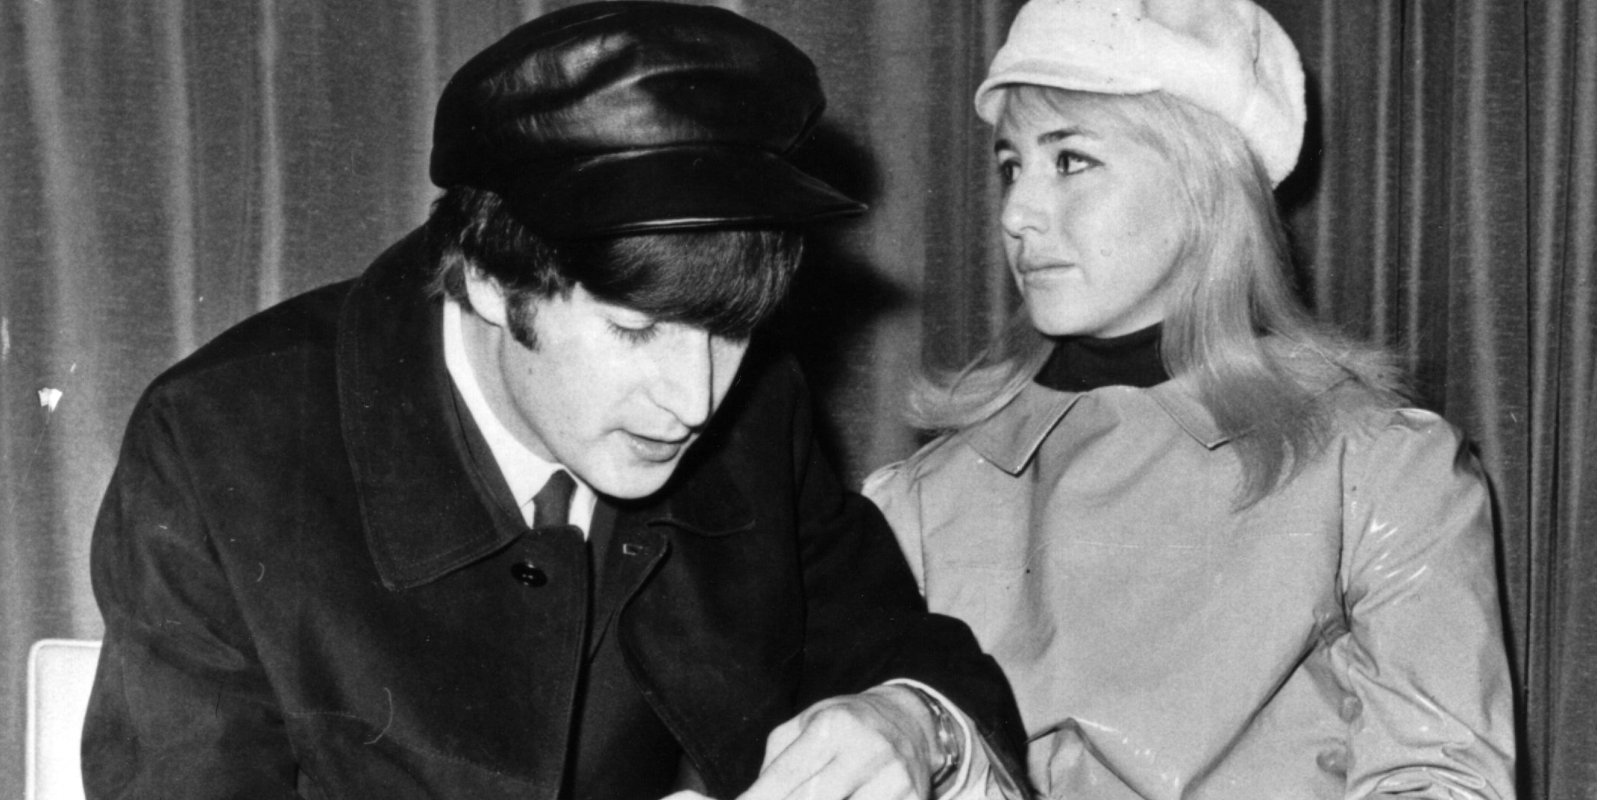 John Lennon’s Prolific Song off ‘Let It Be’ Was Written About His Wife Cynthia